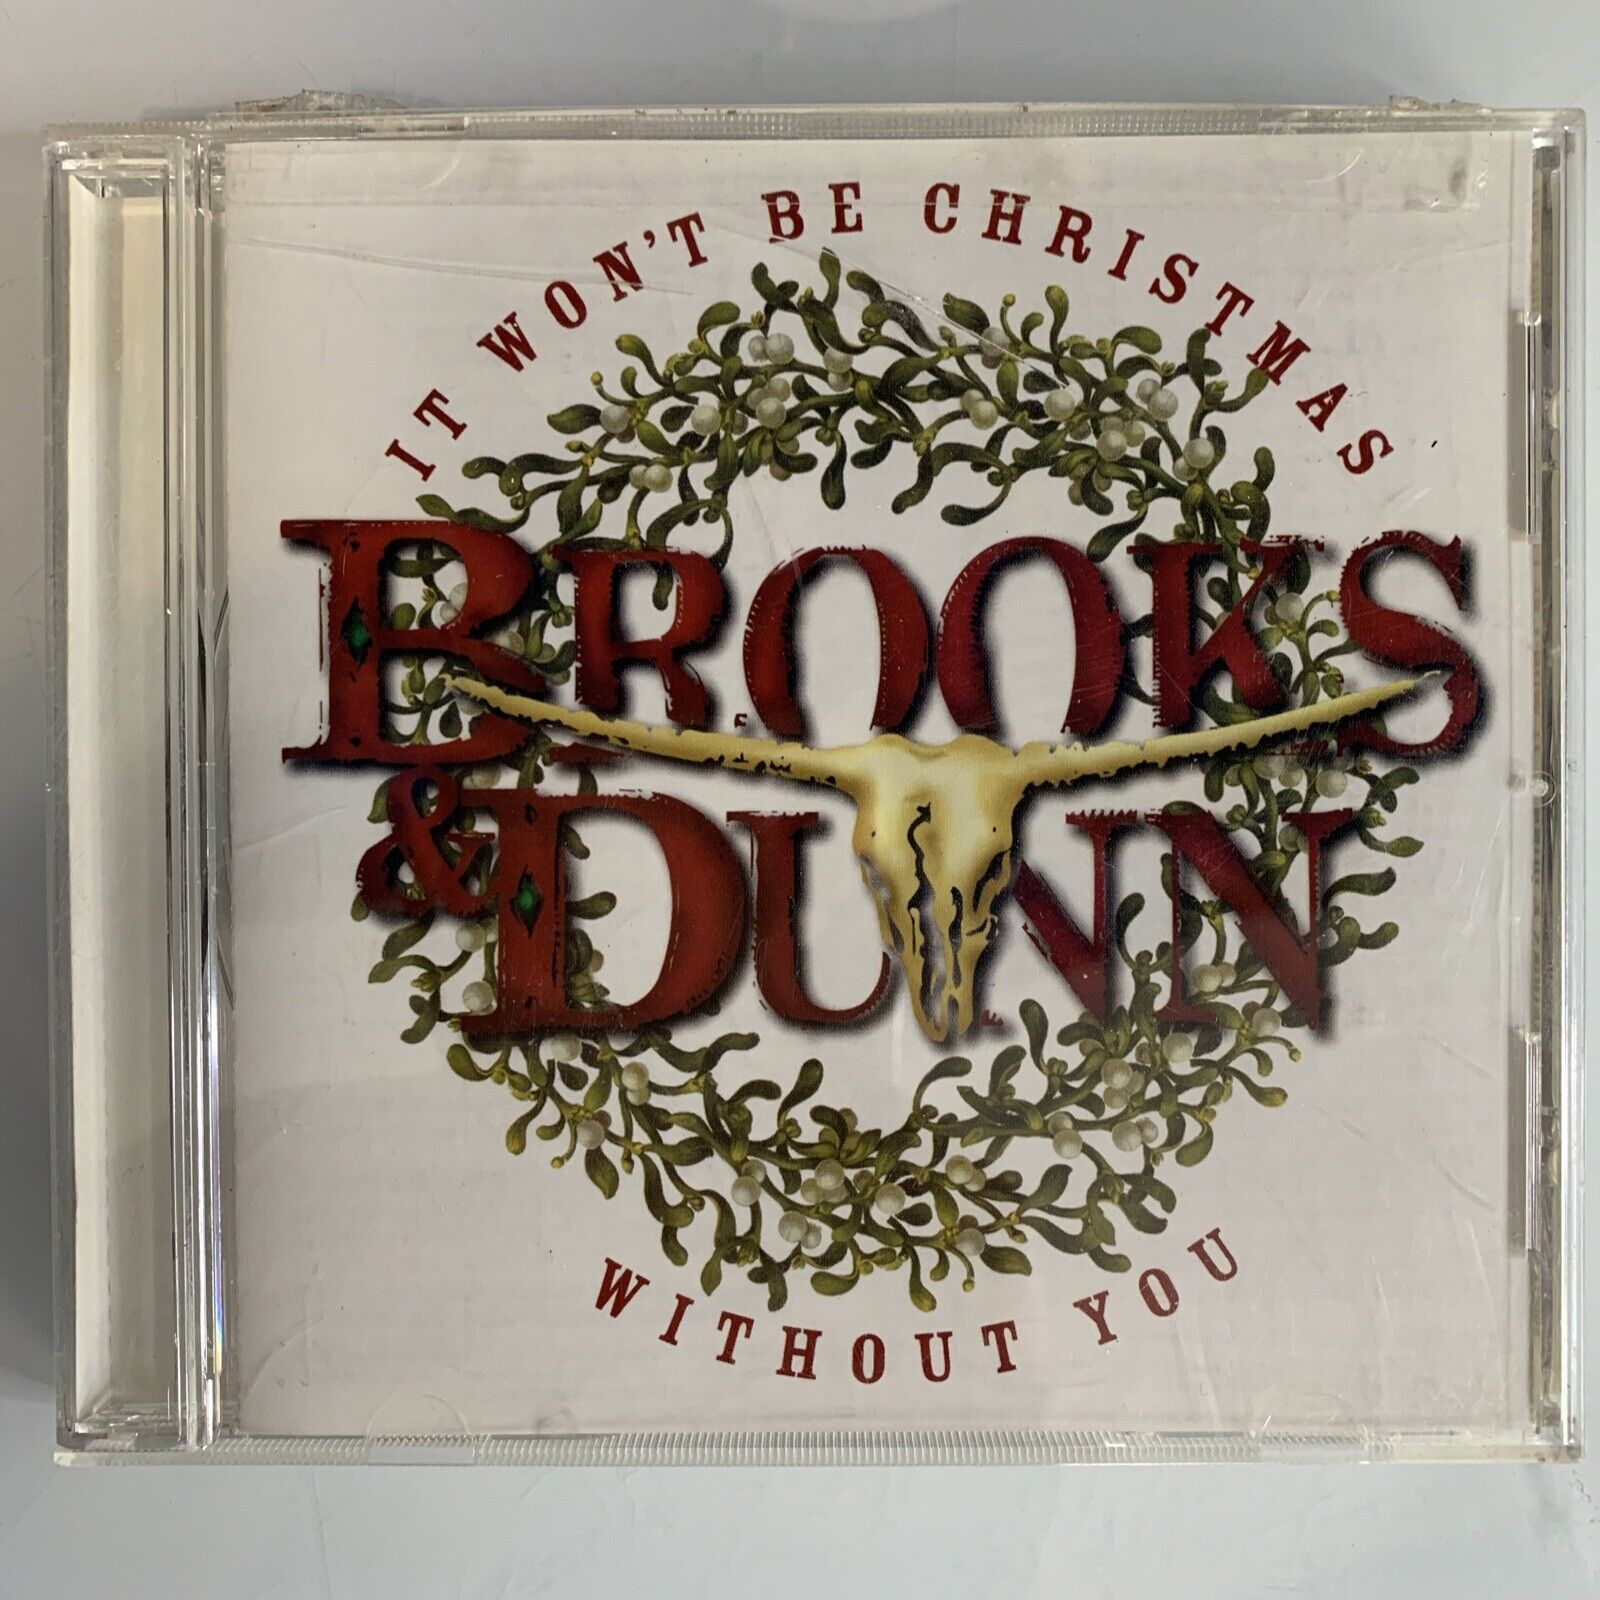 It Won\'t Be Christmas Without You by Brooks & Dunn (CD, Oct-2002, Arista)